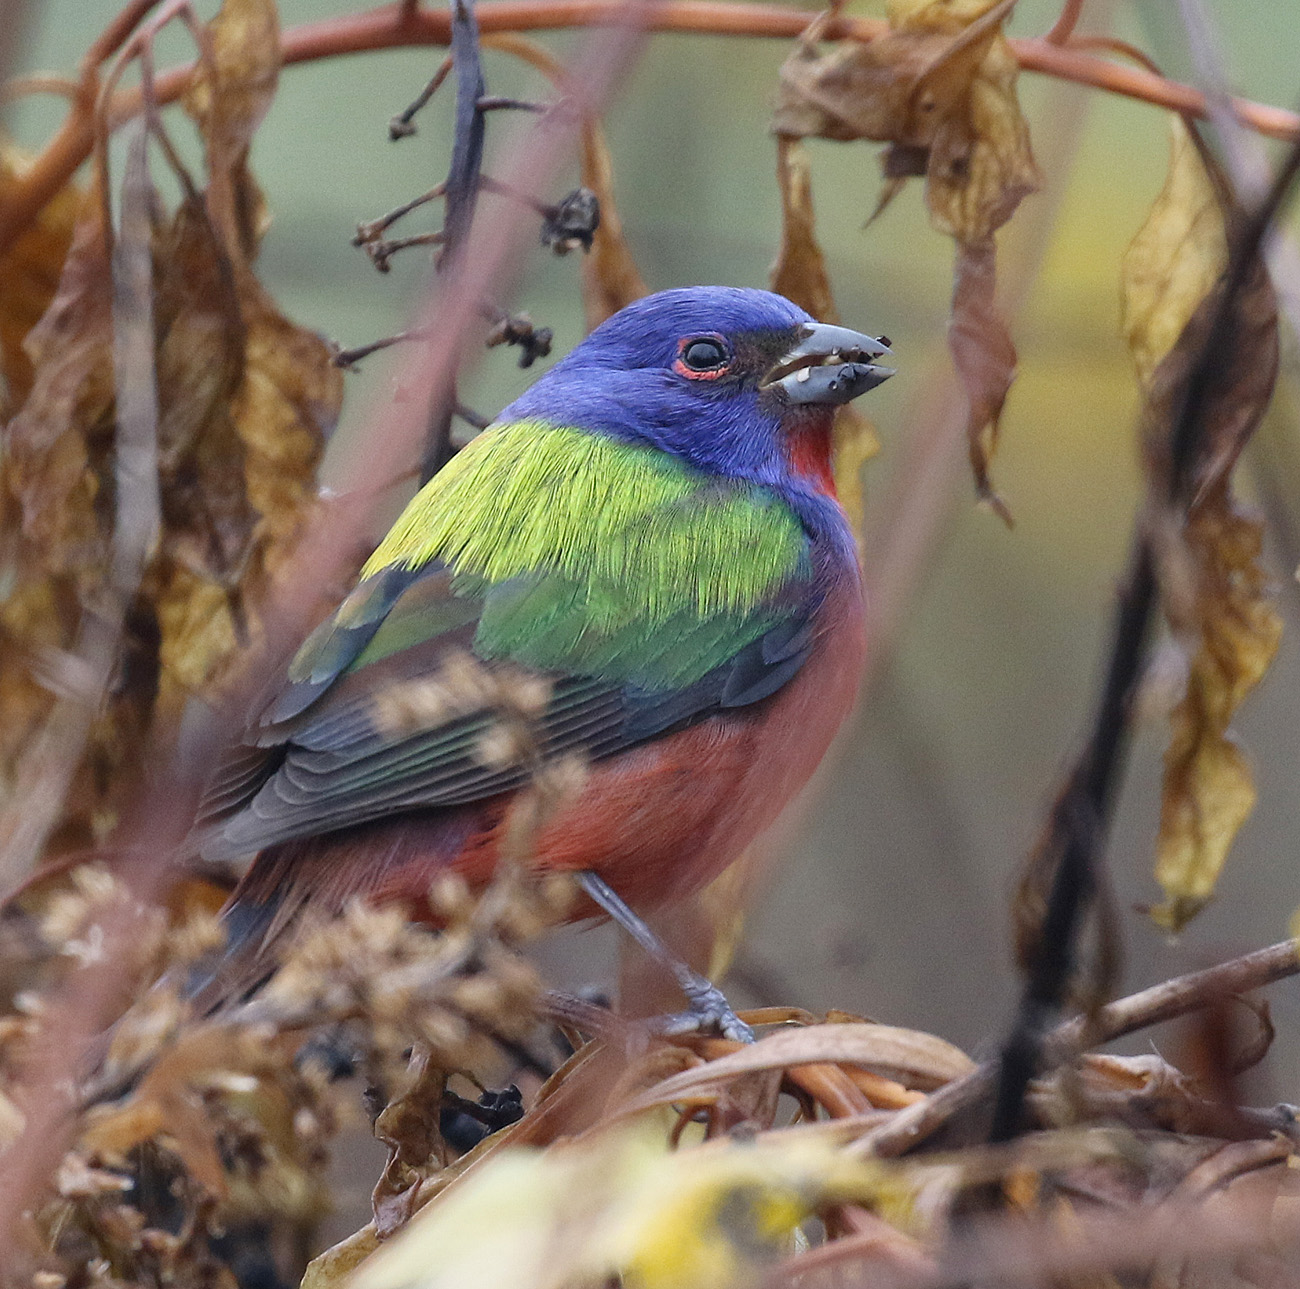 PHOTO: The Painted Bunting, an exotic bird rarely seen north of Arkansas, has been frolicking in New York City's Prospect Park in Brooklyn, attracting hundreds of admirers.